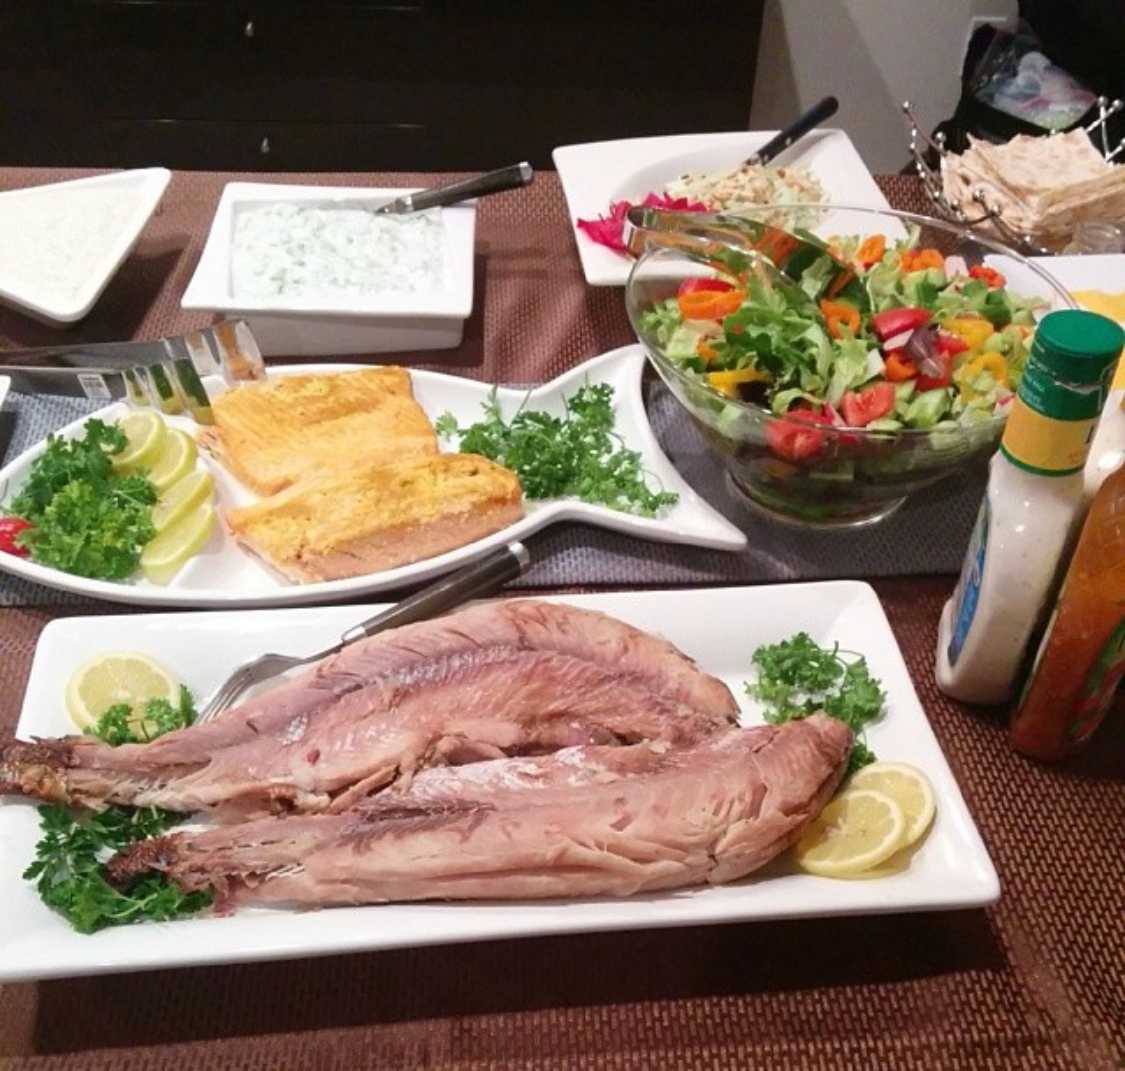 A+table+set+with+dishes%2C+such+as+zook%2C+that+are+eaten+during+Armenian+Christmas+dinner+.+Photo+credit%3A+Karin+Abcarians